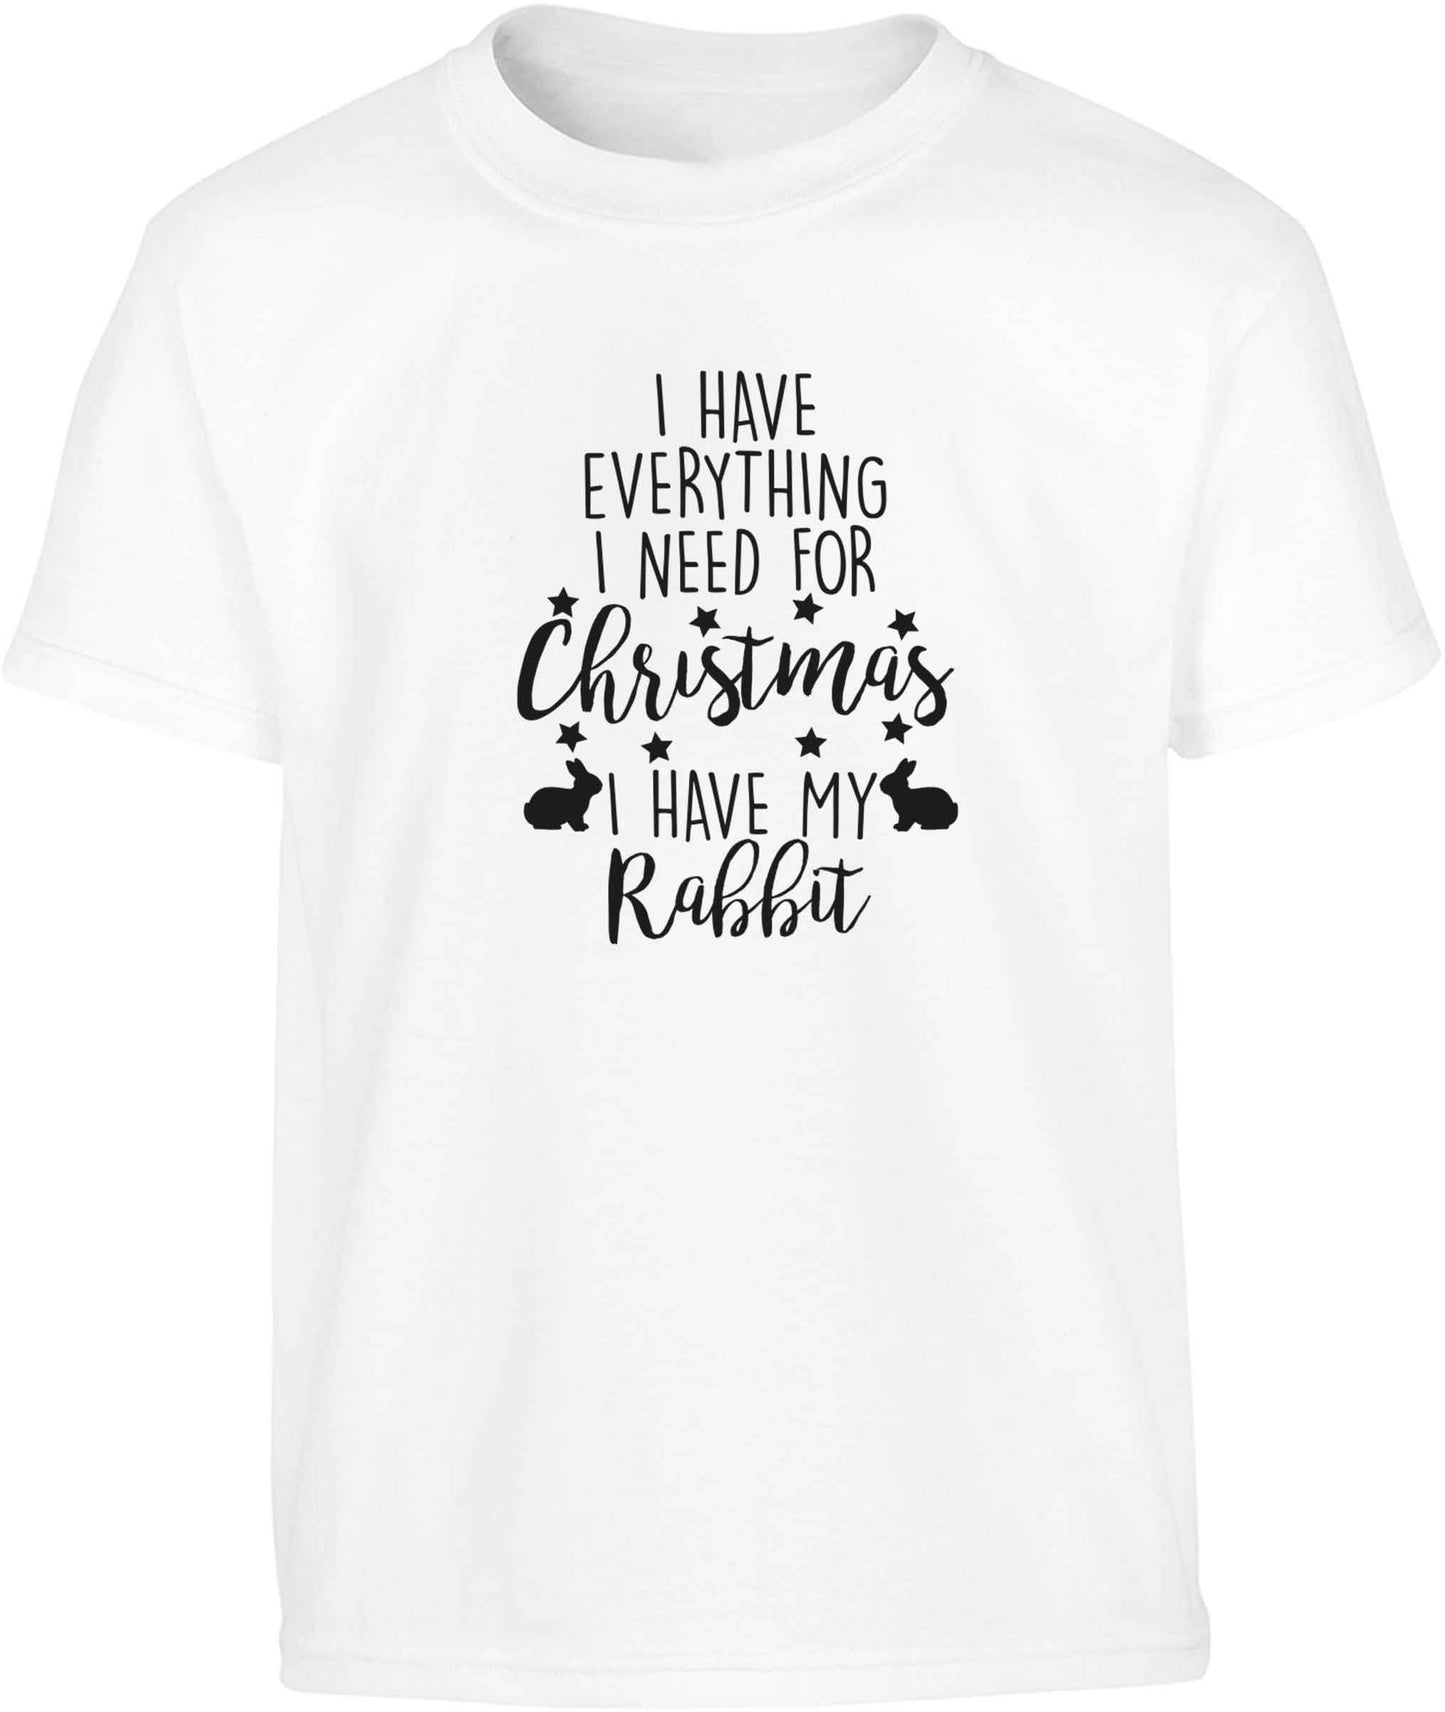 I have everything I need for Christmas I have my rabbit Children's white Tshirt 12-13 Years